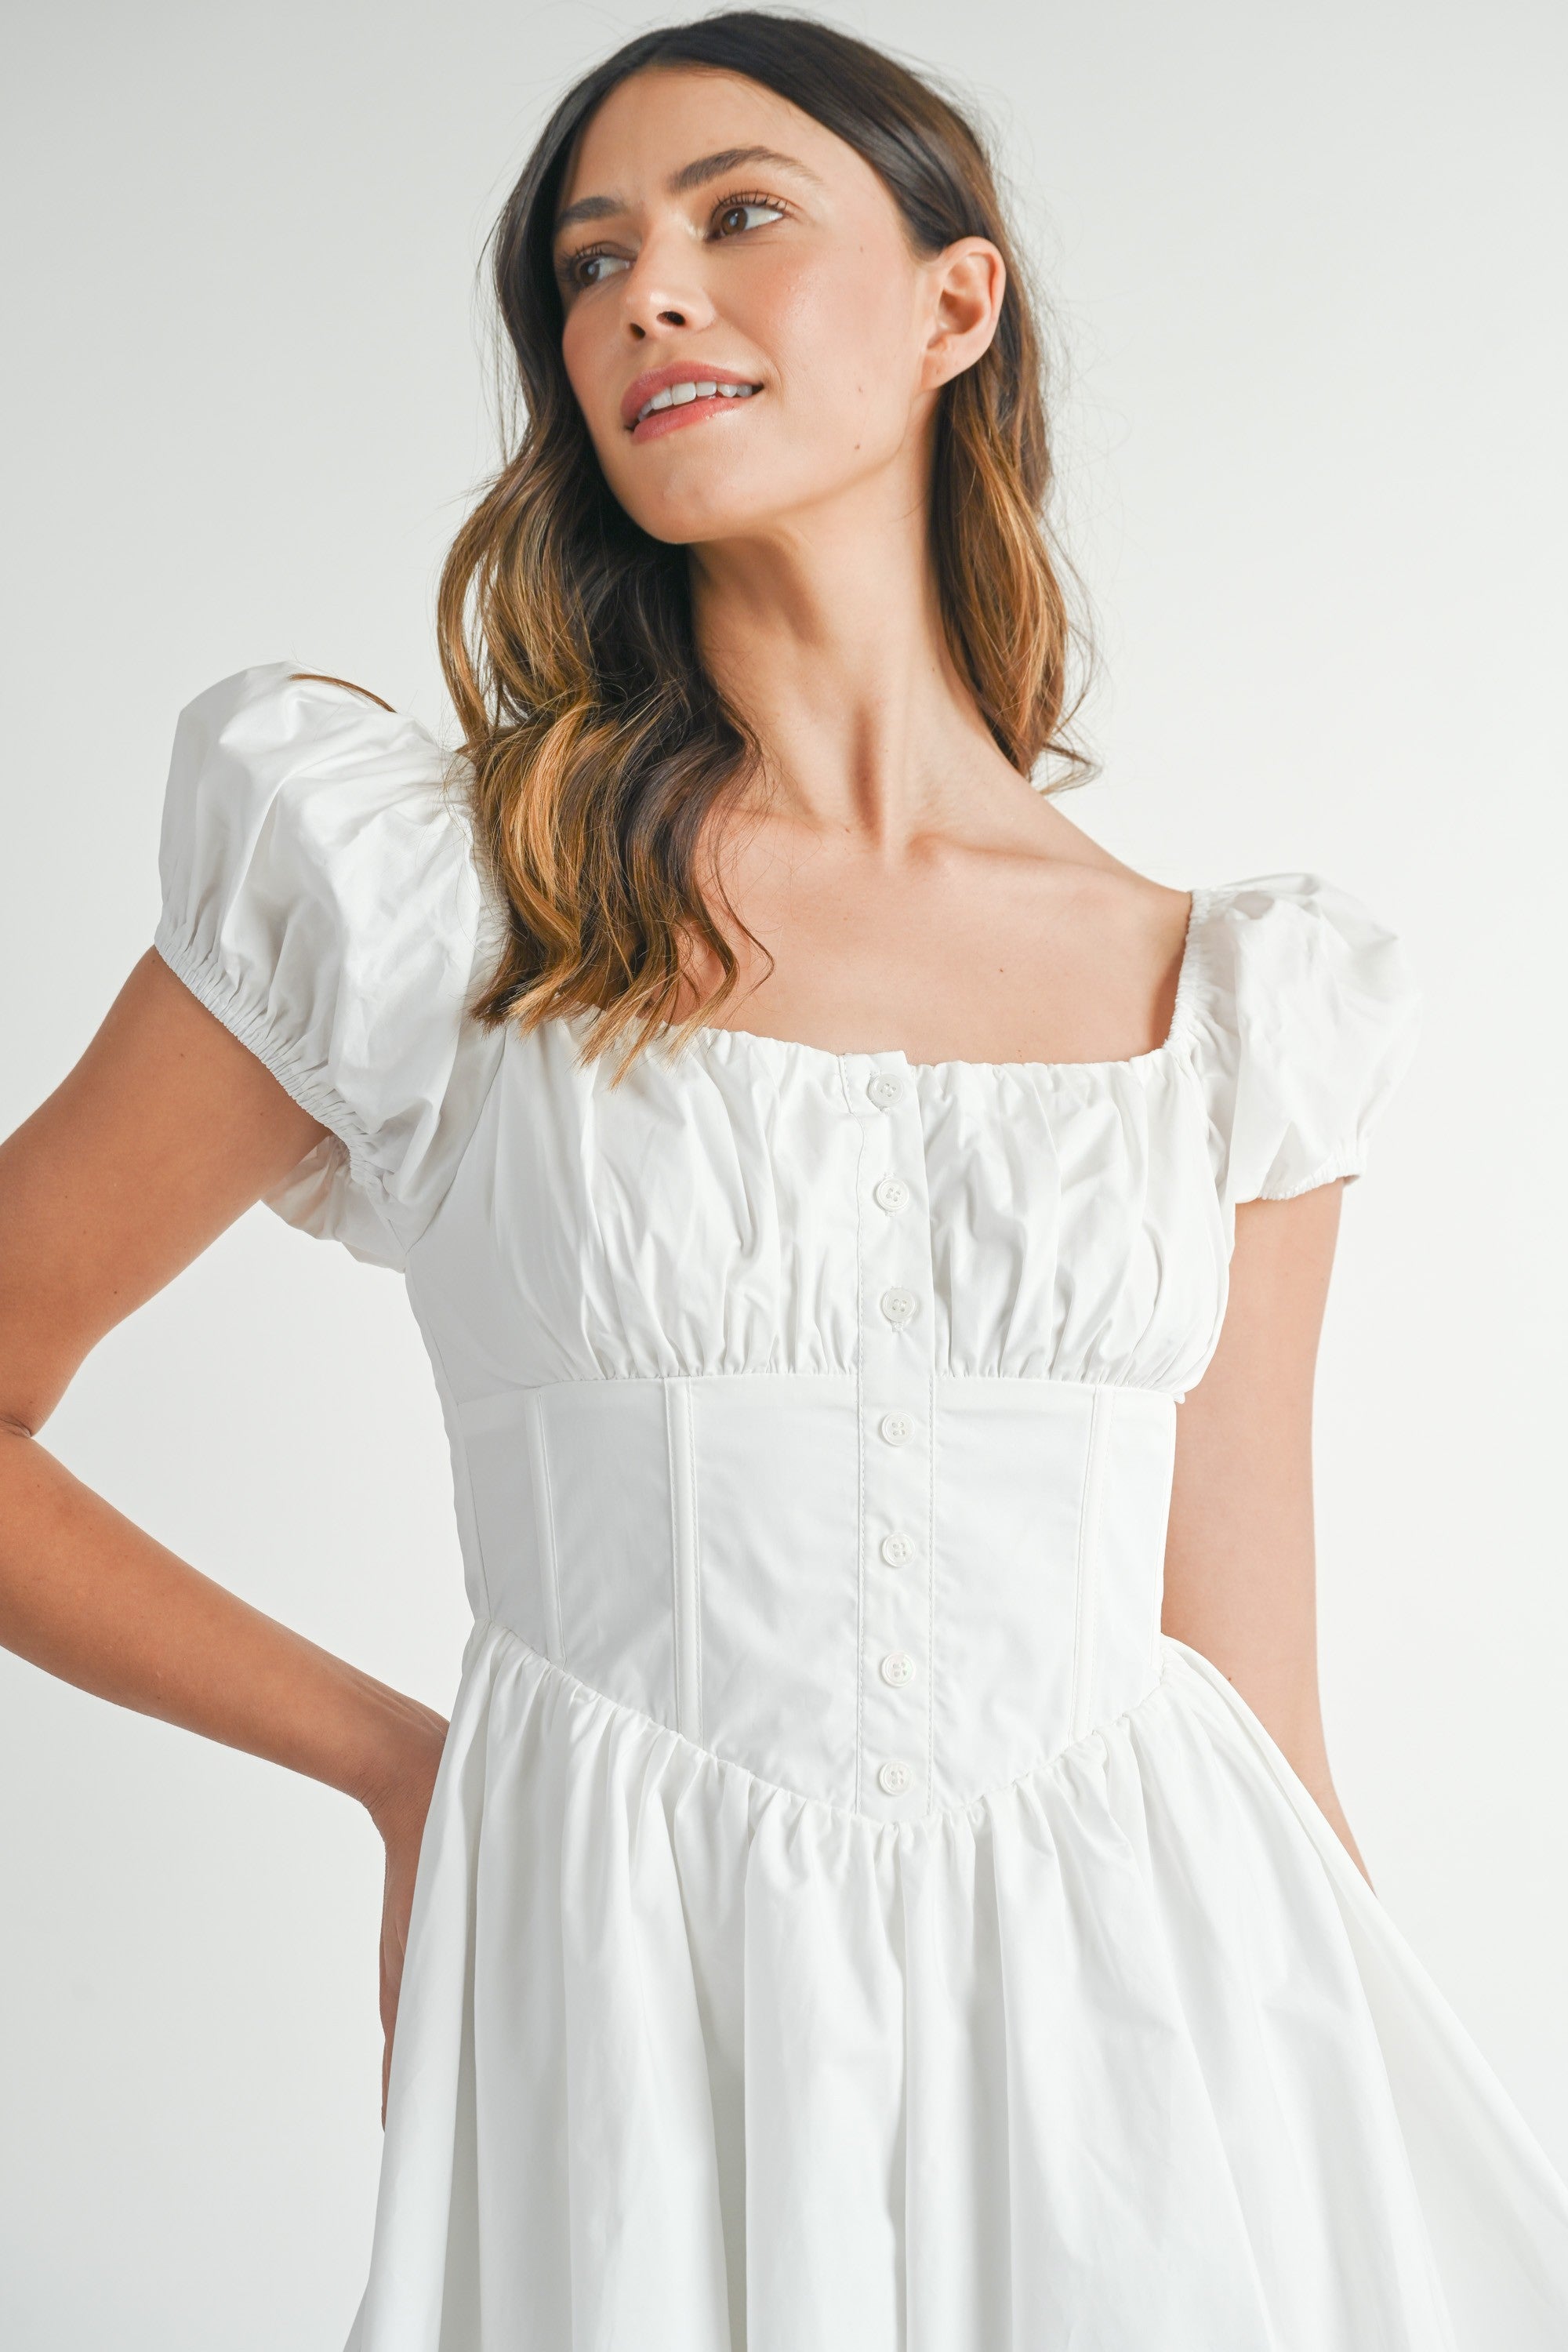 Off White Puff Sleeve Bustier Button Down Mini Dress | Collective Request 